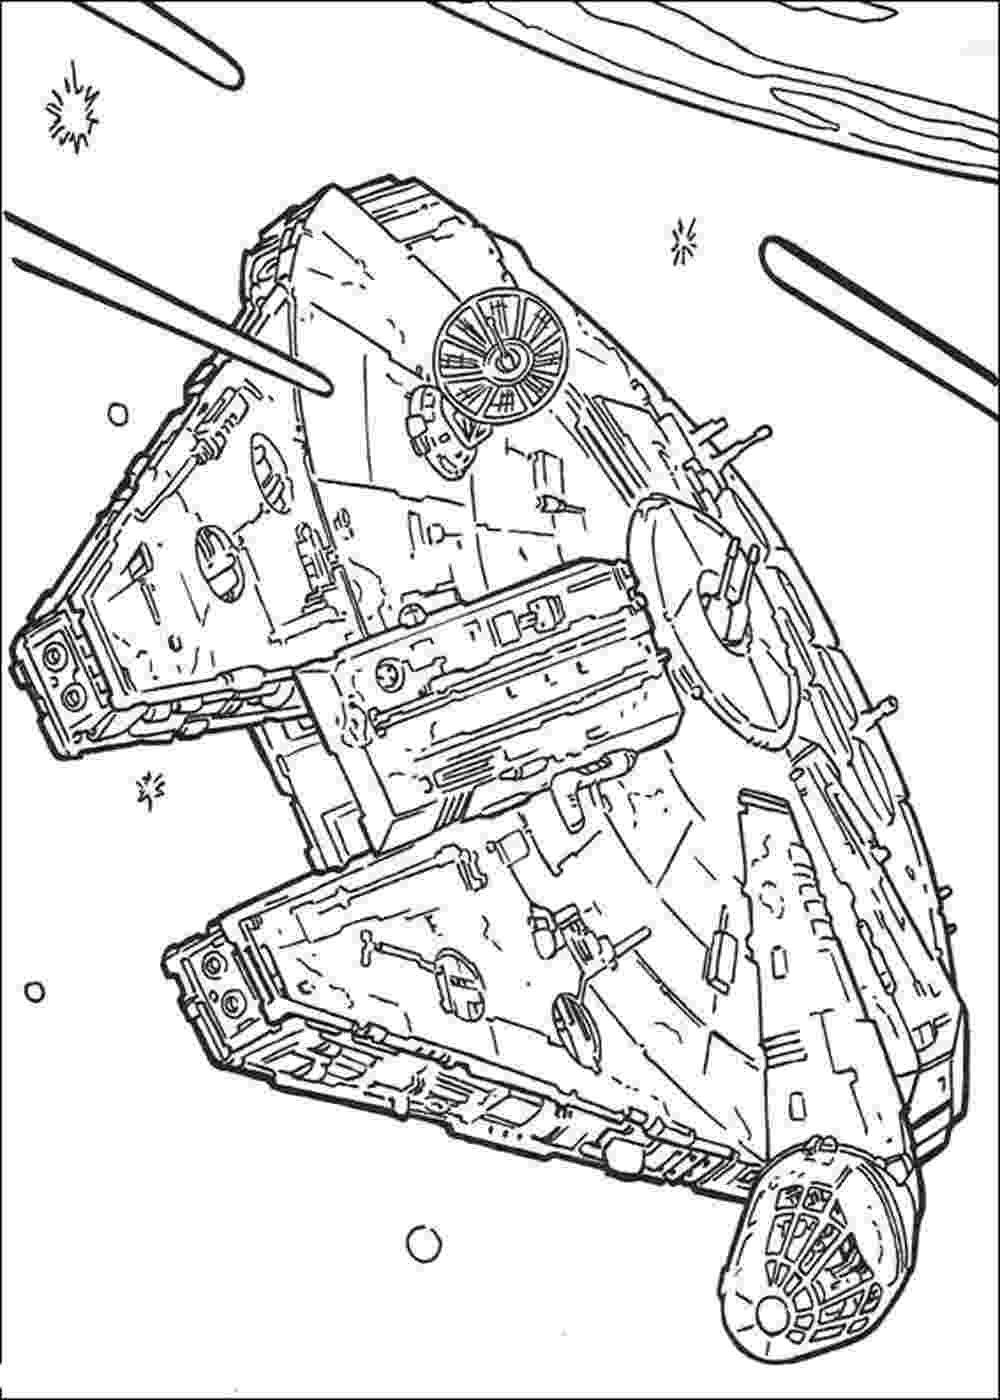 star wars coloring pages to print for free polkadots on parade star wars the force awakens coloring to star pages for wars coloring free print 